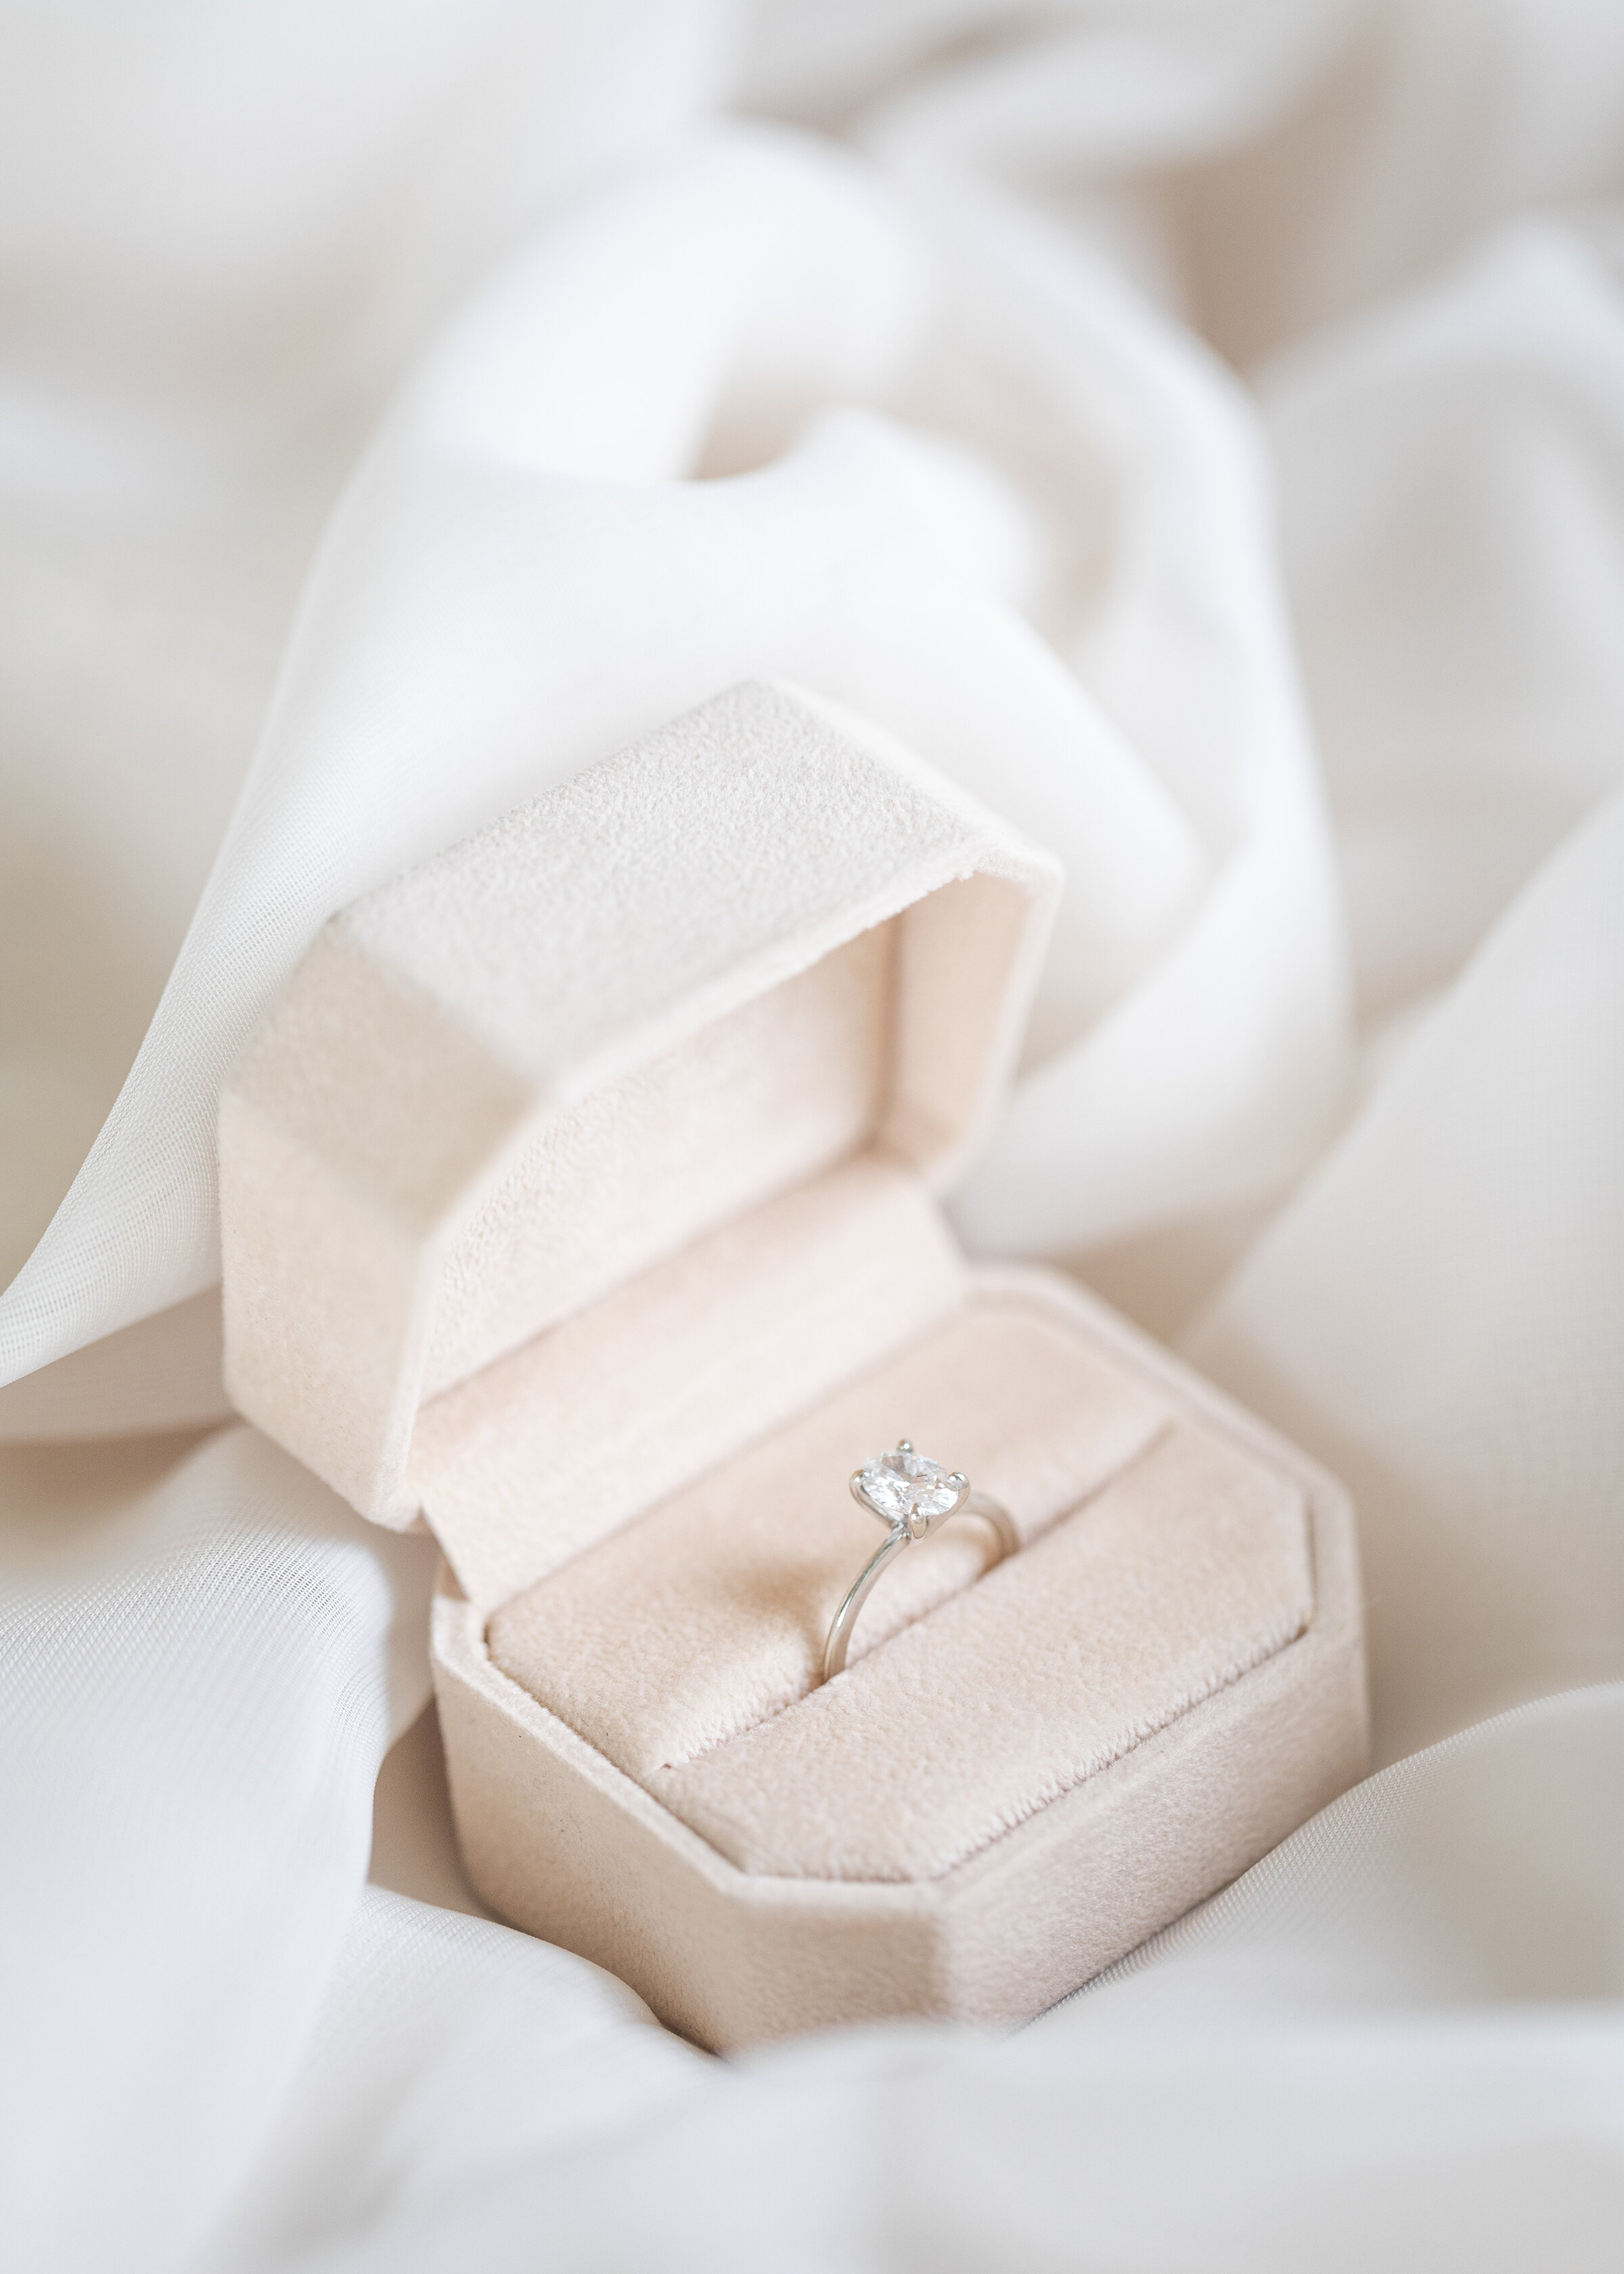  Clarity Lane Photography excels at capturing wedding day details at a reception in Salt Lake City, Utah. soft pink velvet wedding ring box, velvet proposal box, professional salt lake city utah wedding photographer, photographing wedding day details